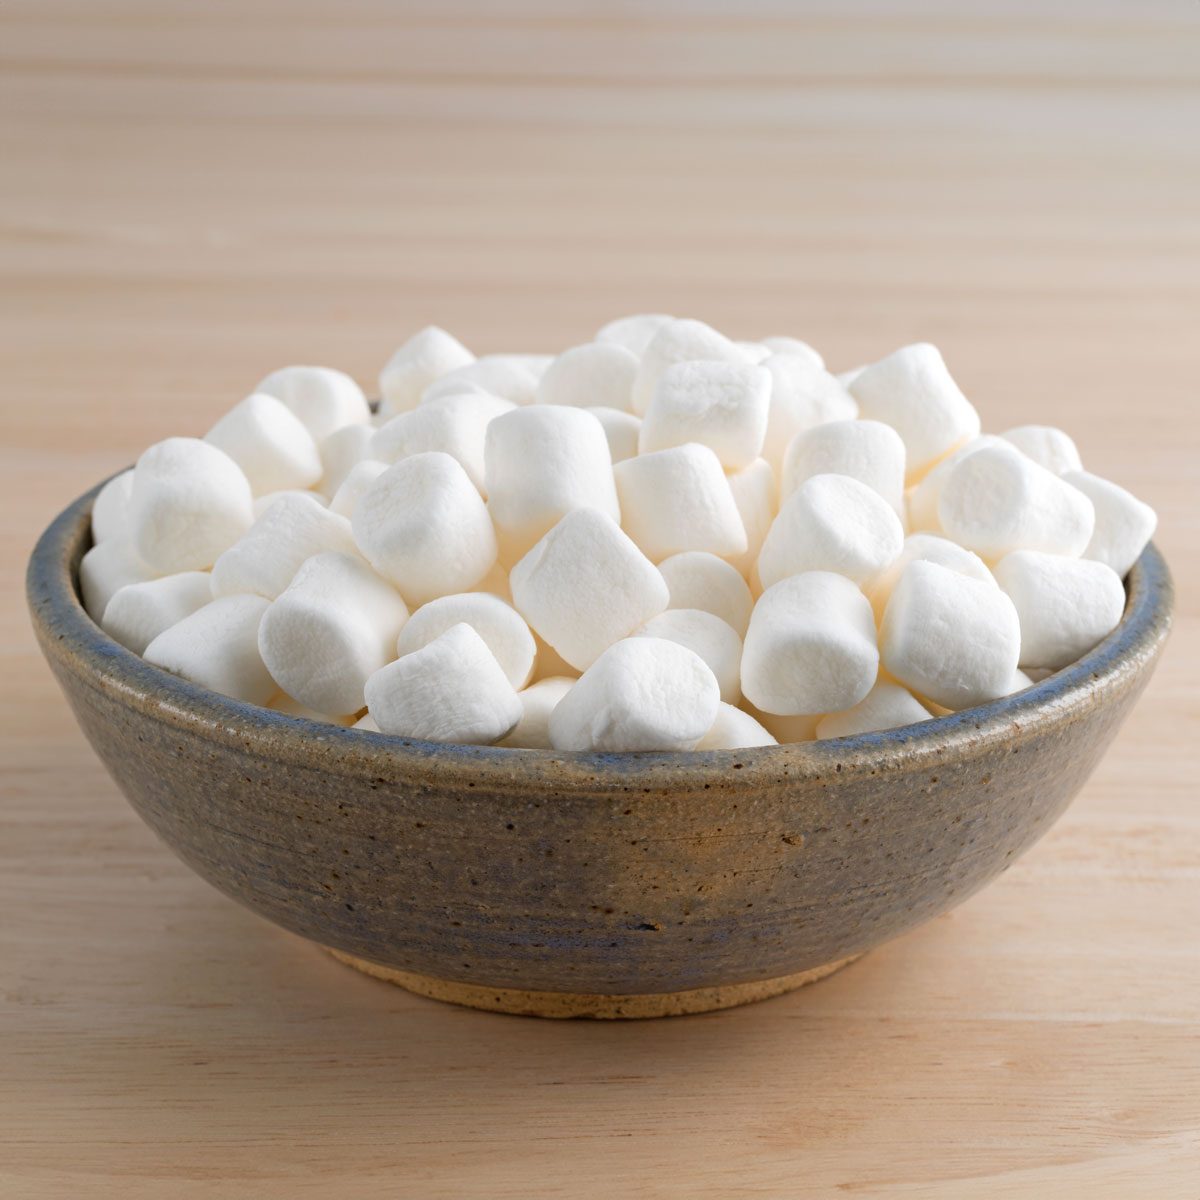 Small Bite Size Marshmallows Filling An Old Stoneware Bowl On A Wood Table